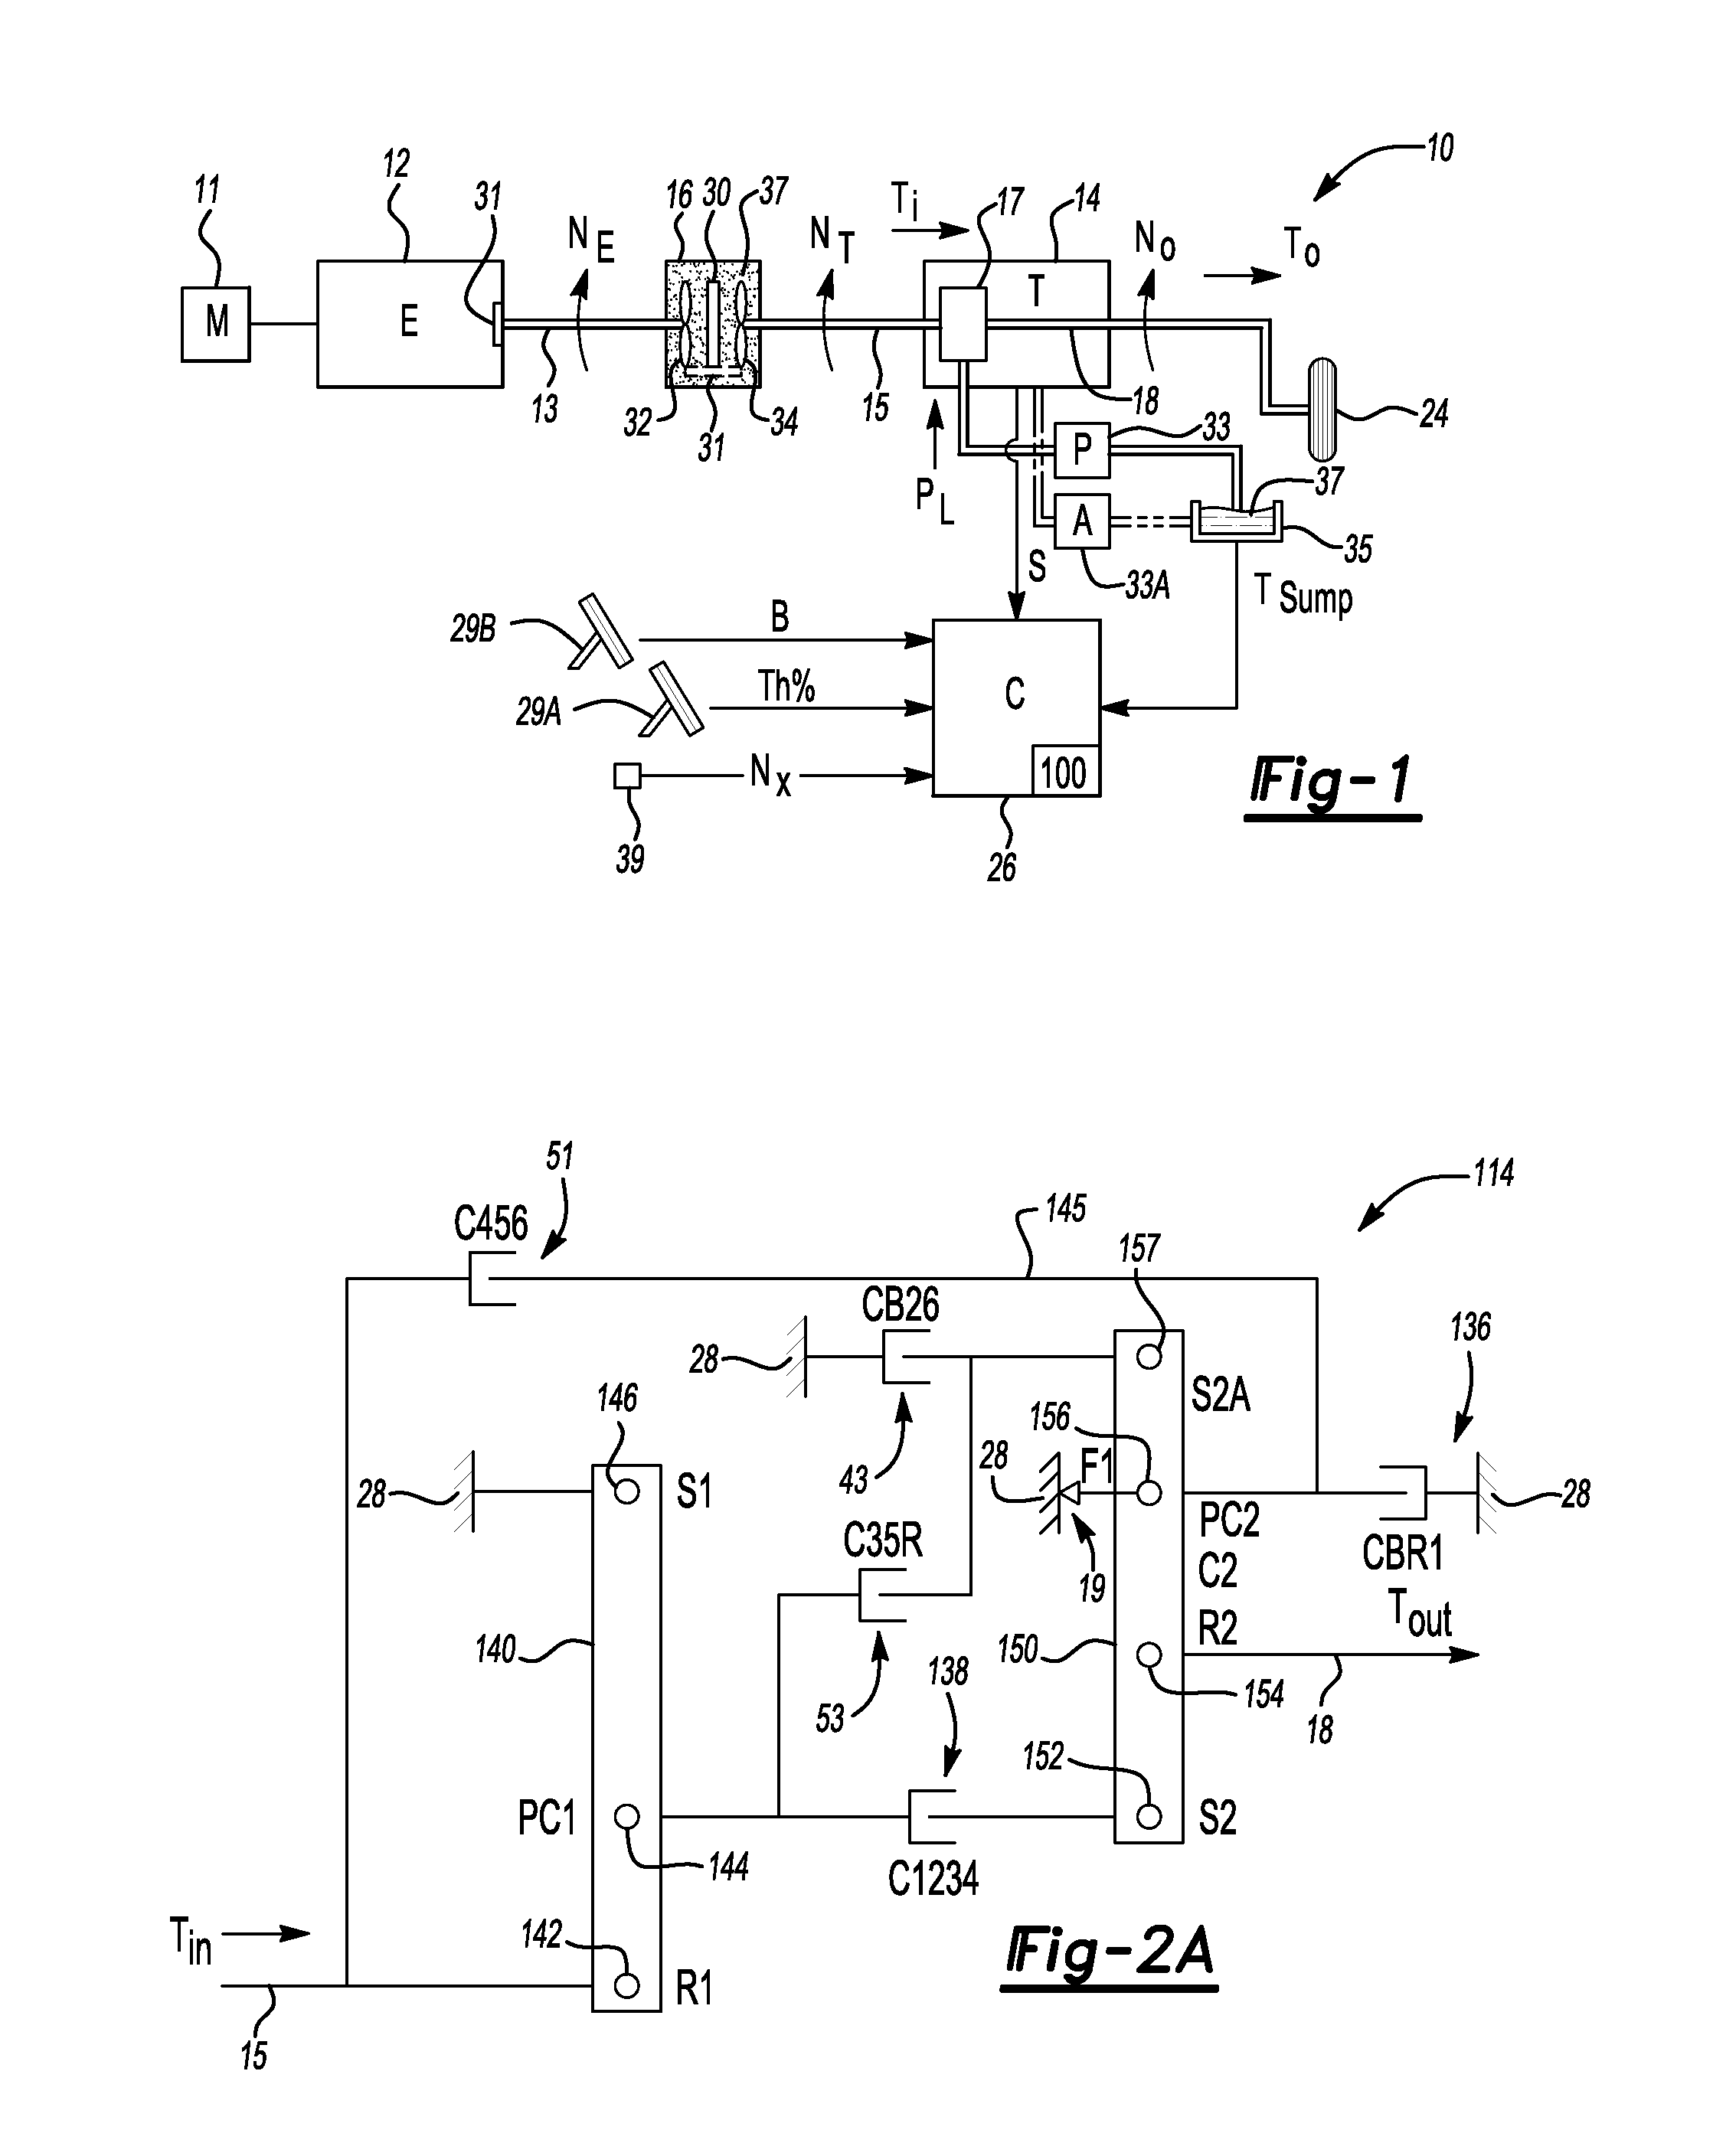 Method and apparatus for neutral idle clutch control in a vehicle having an engine start-stop powertrain